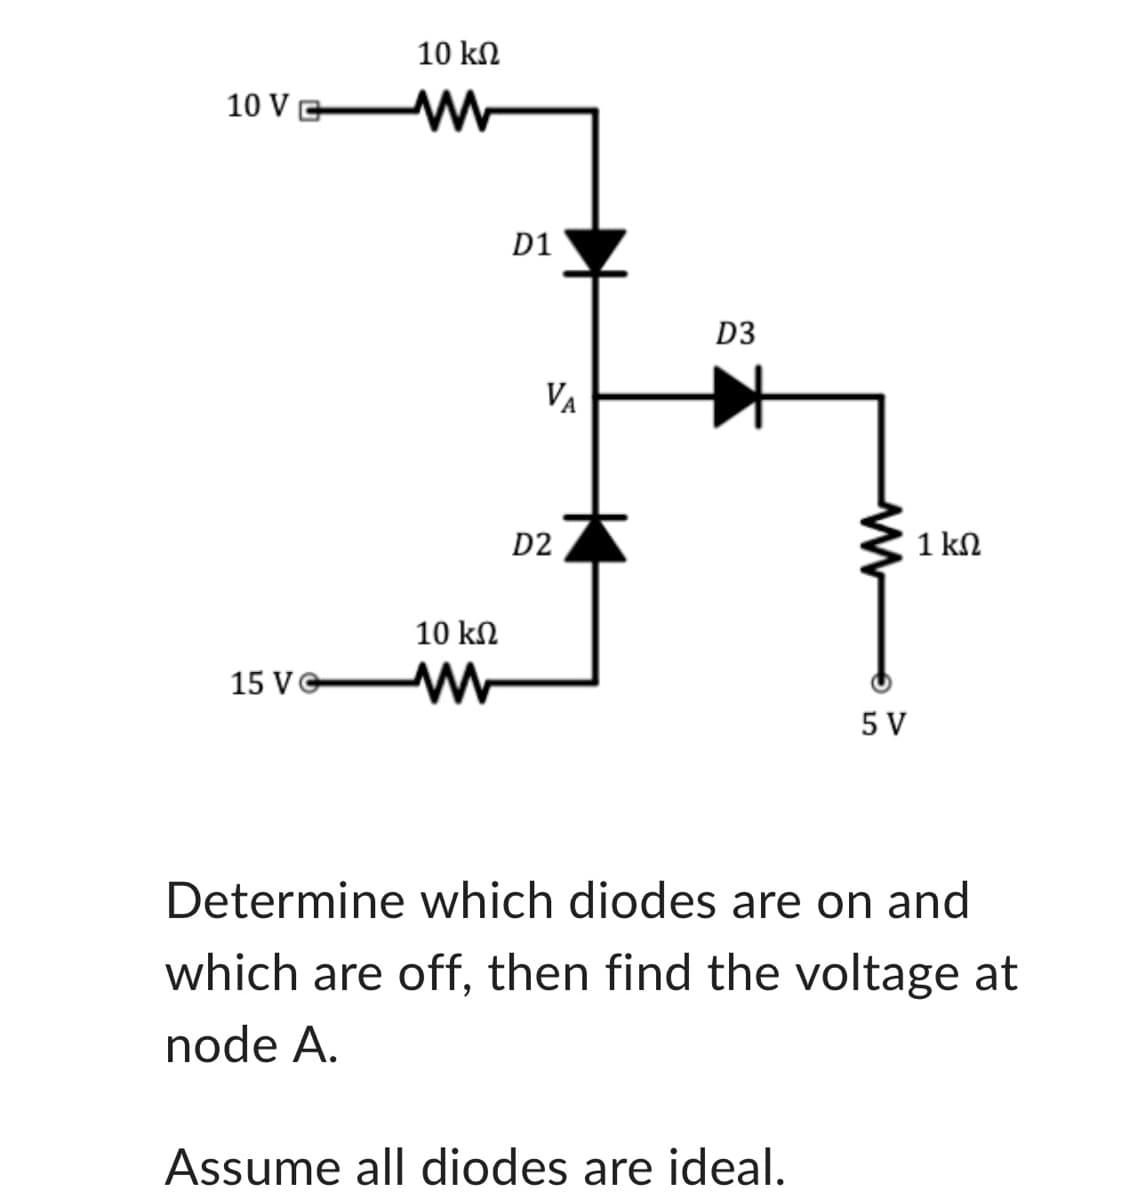 10 VG
15 Ve
10 ΚΩ
M
10 ΚΩ
D1
VA
D2
D3
5 V
Assume all diodes are ideal.
1 ΚΩ
Determine which diodes are on and
which are off, then find the voltage at
node A.